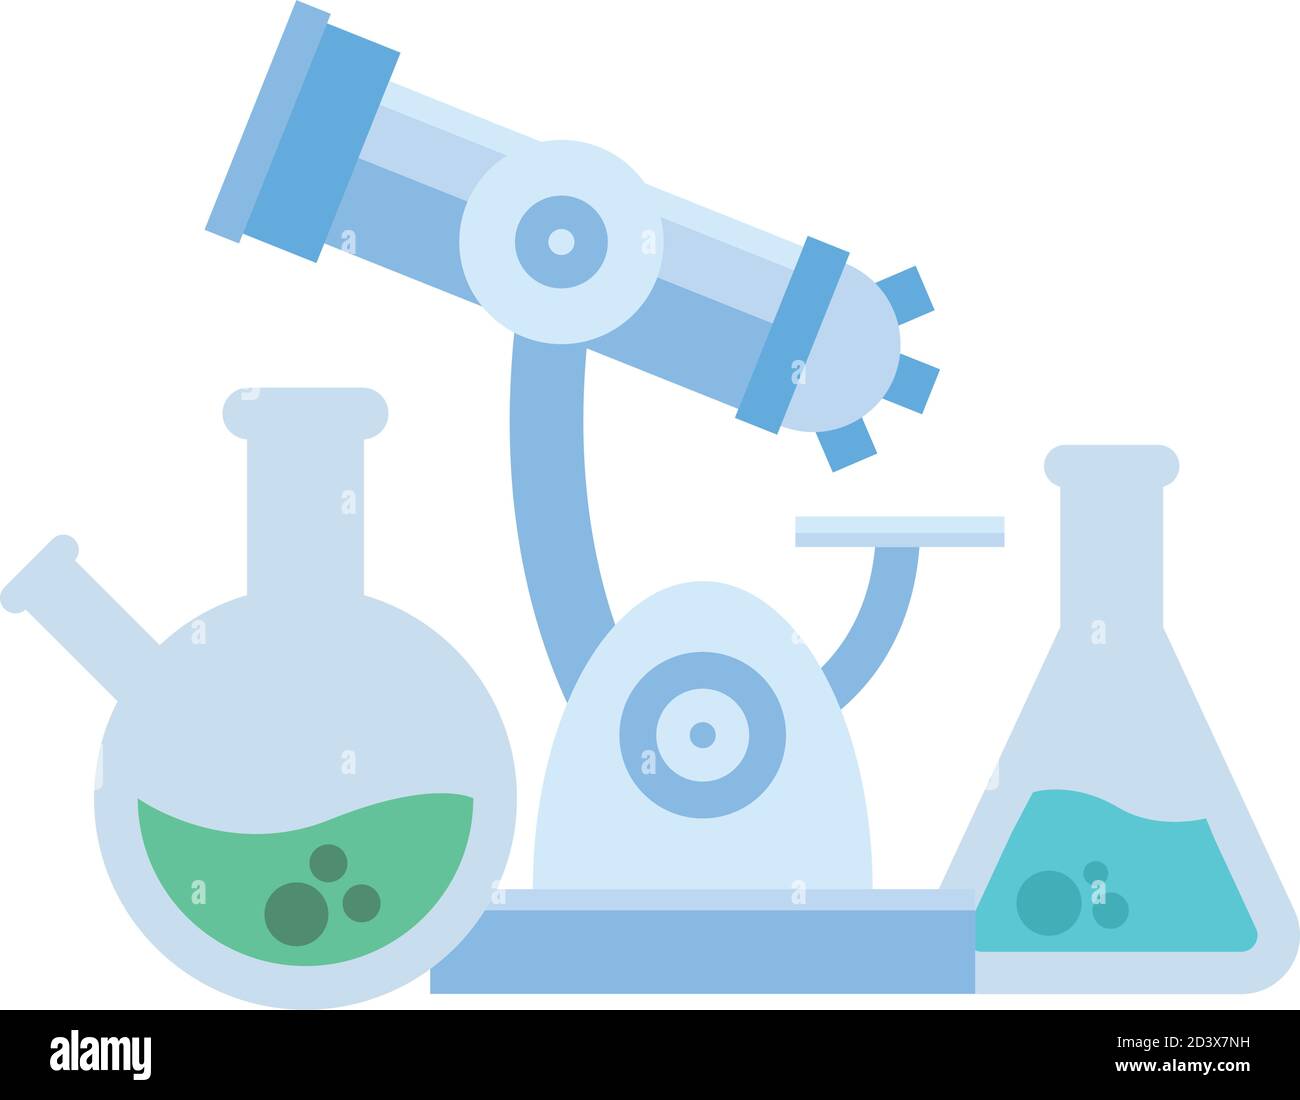 chemistry flasks and microscope design, science and laboratory theme Vector illustration Stock Vector